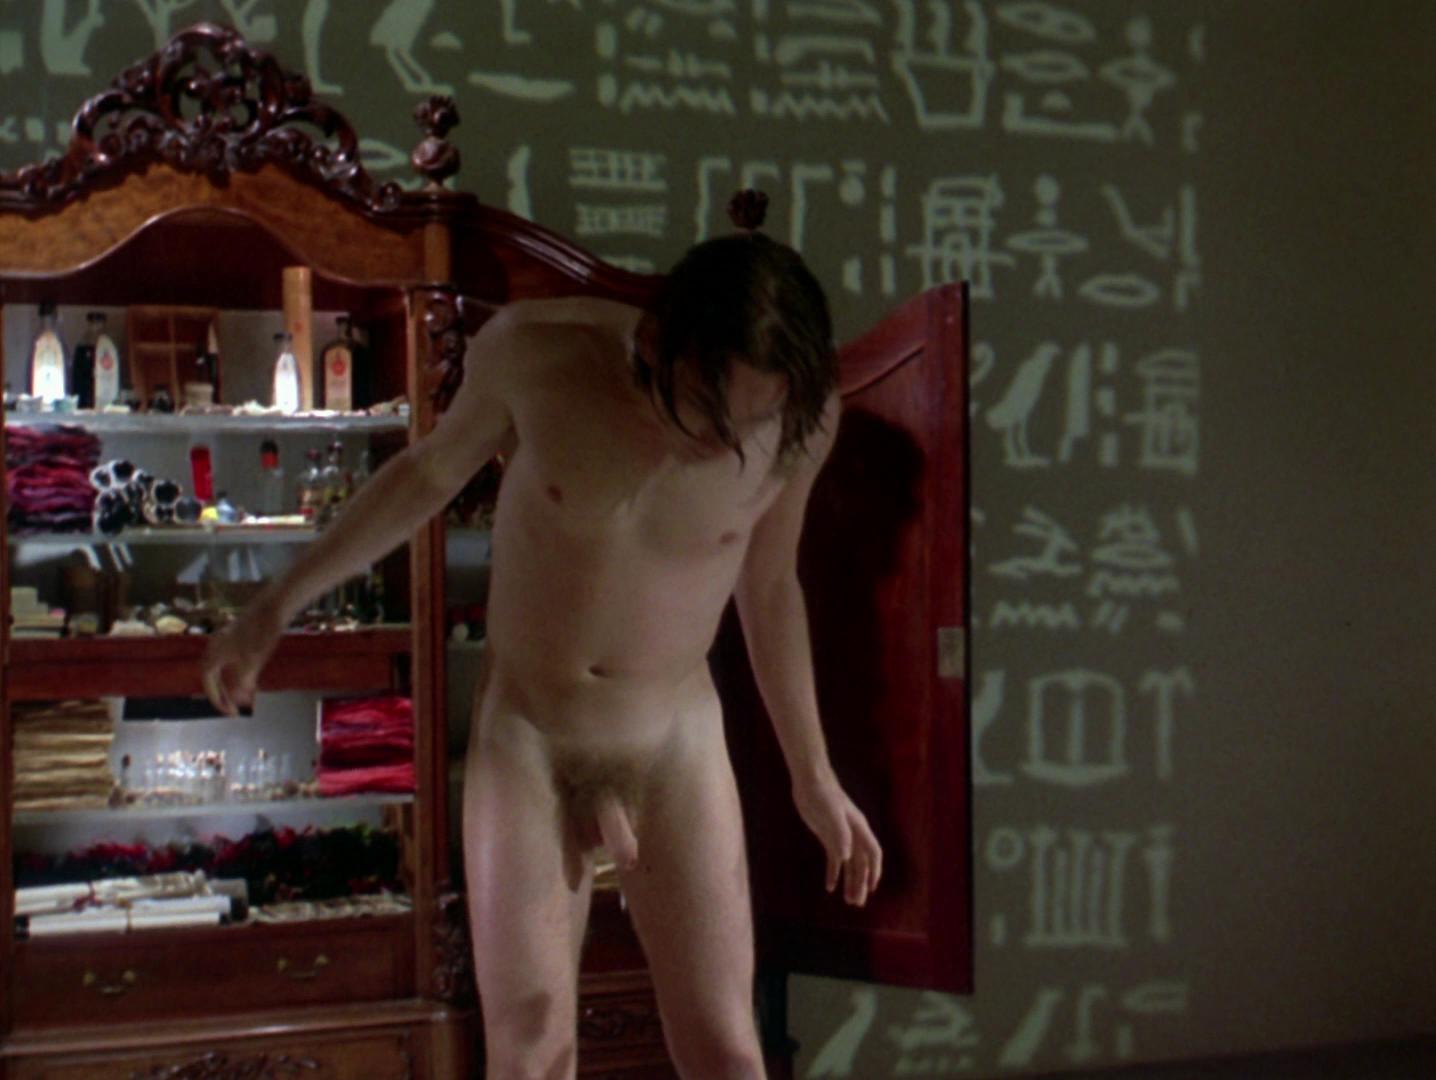 You have read this article Ewan McGregor /frontal nudity /The Pillow Book /...